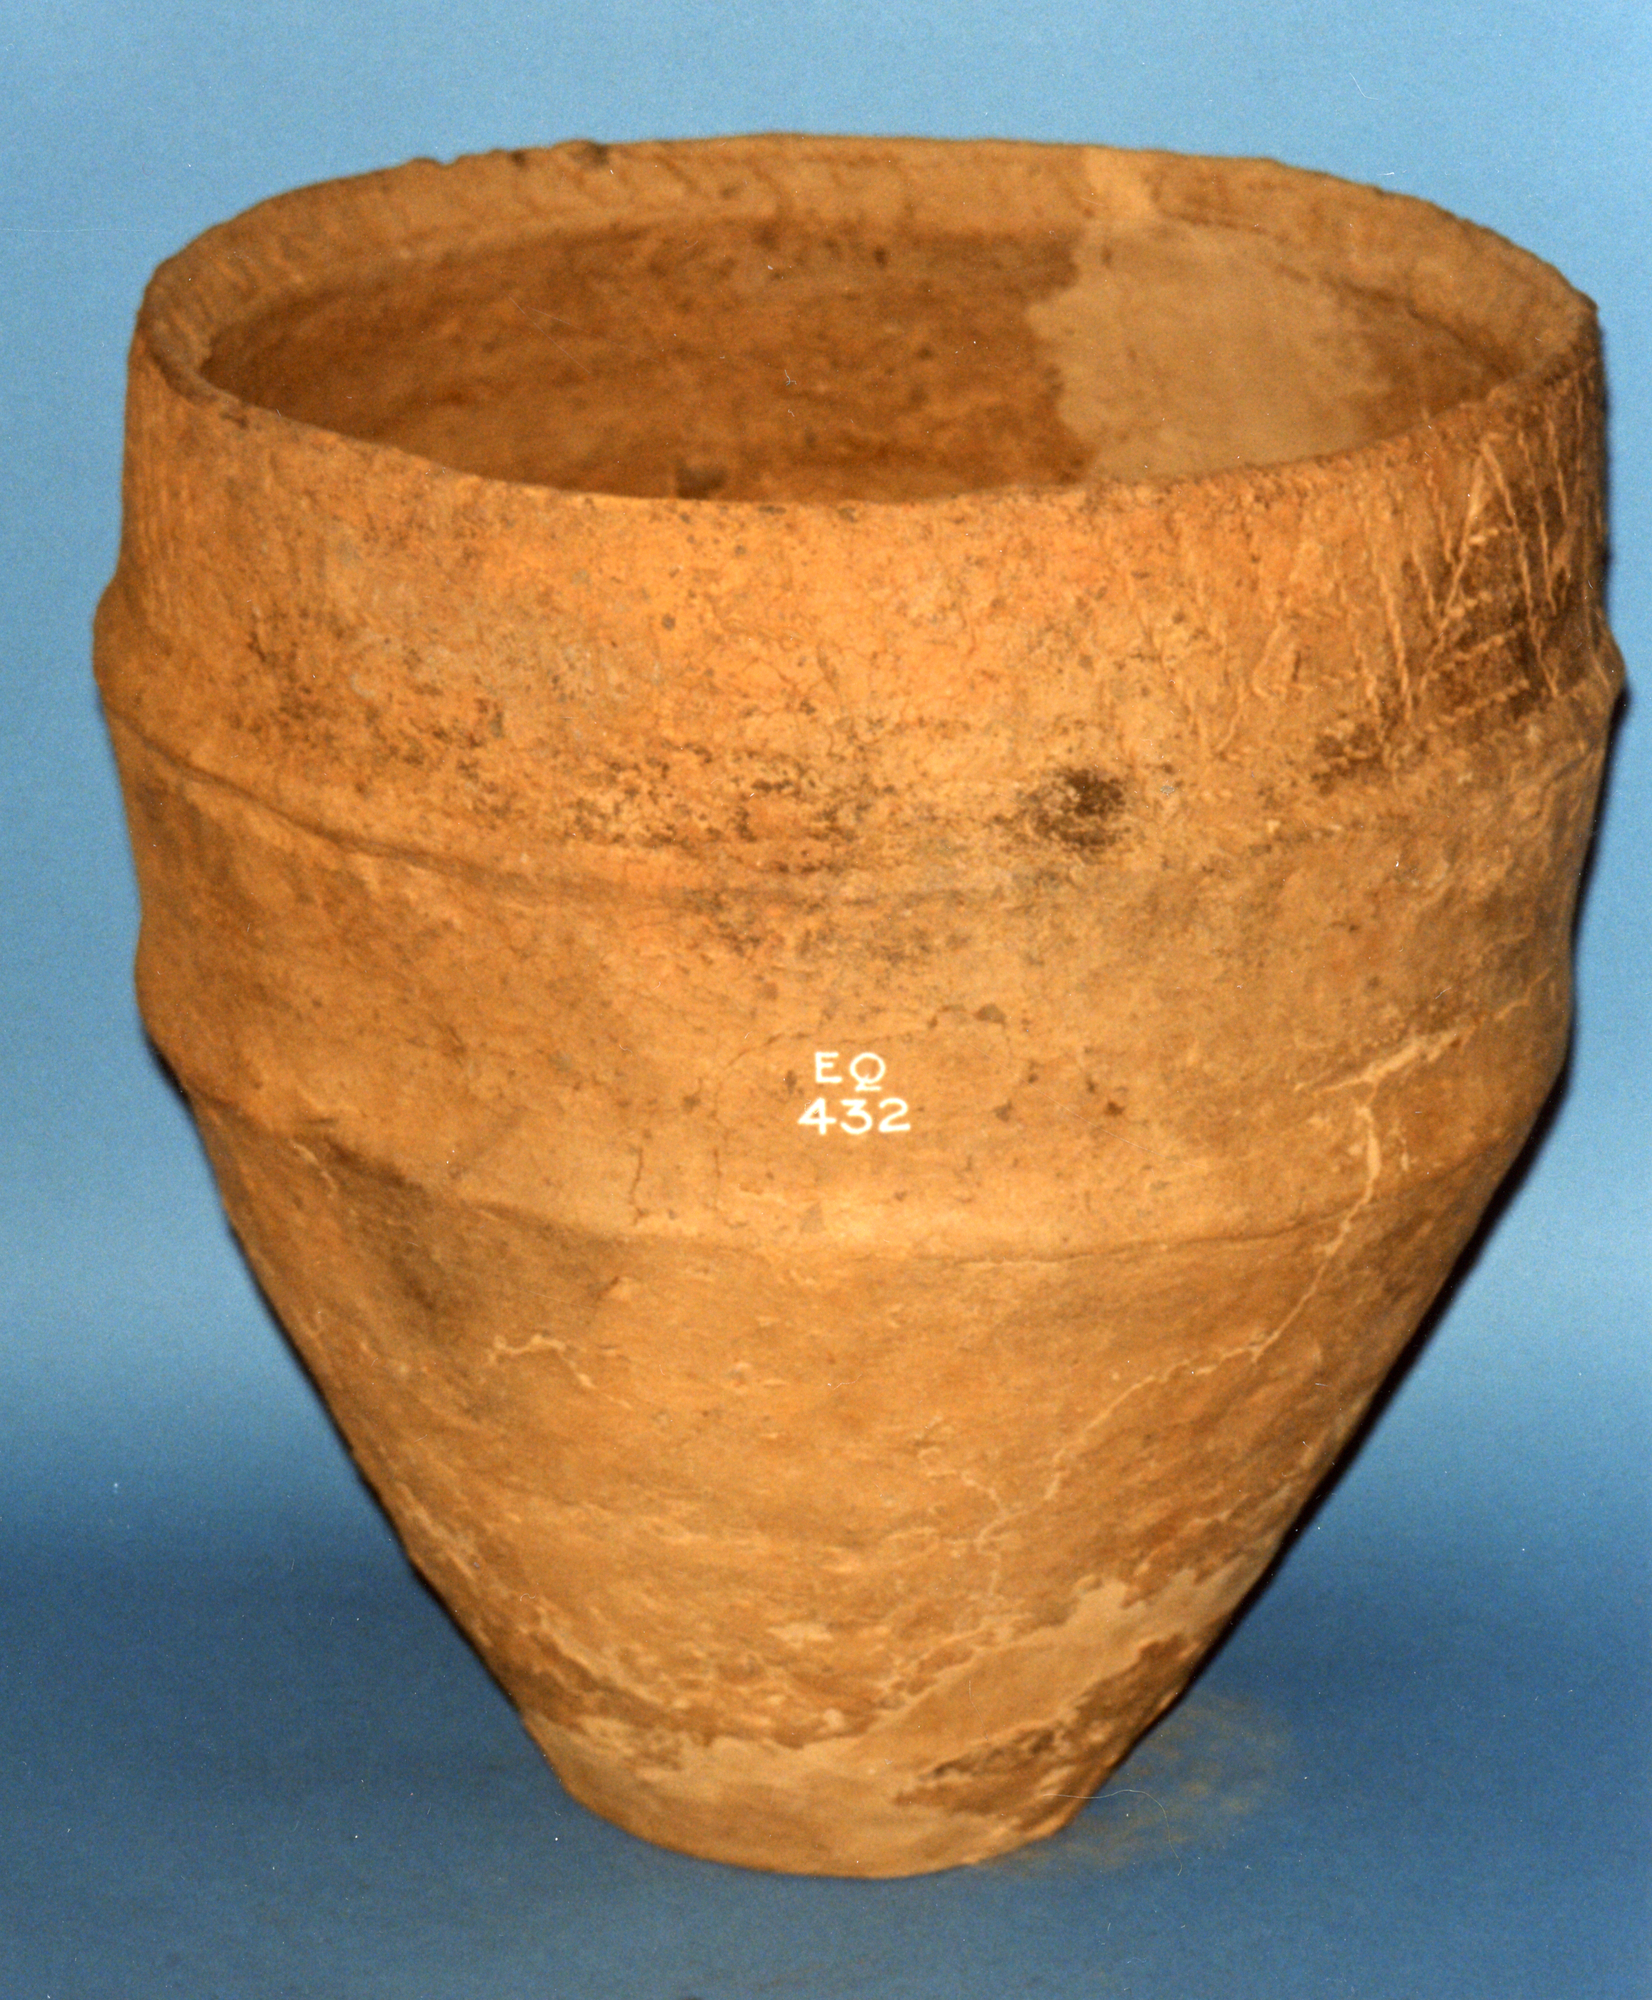 Image of Cinerary urn of brown clay, from Horsburgh Castle Farm, Innerleithen, Peeblesshire © National Museums Scotland